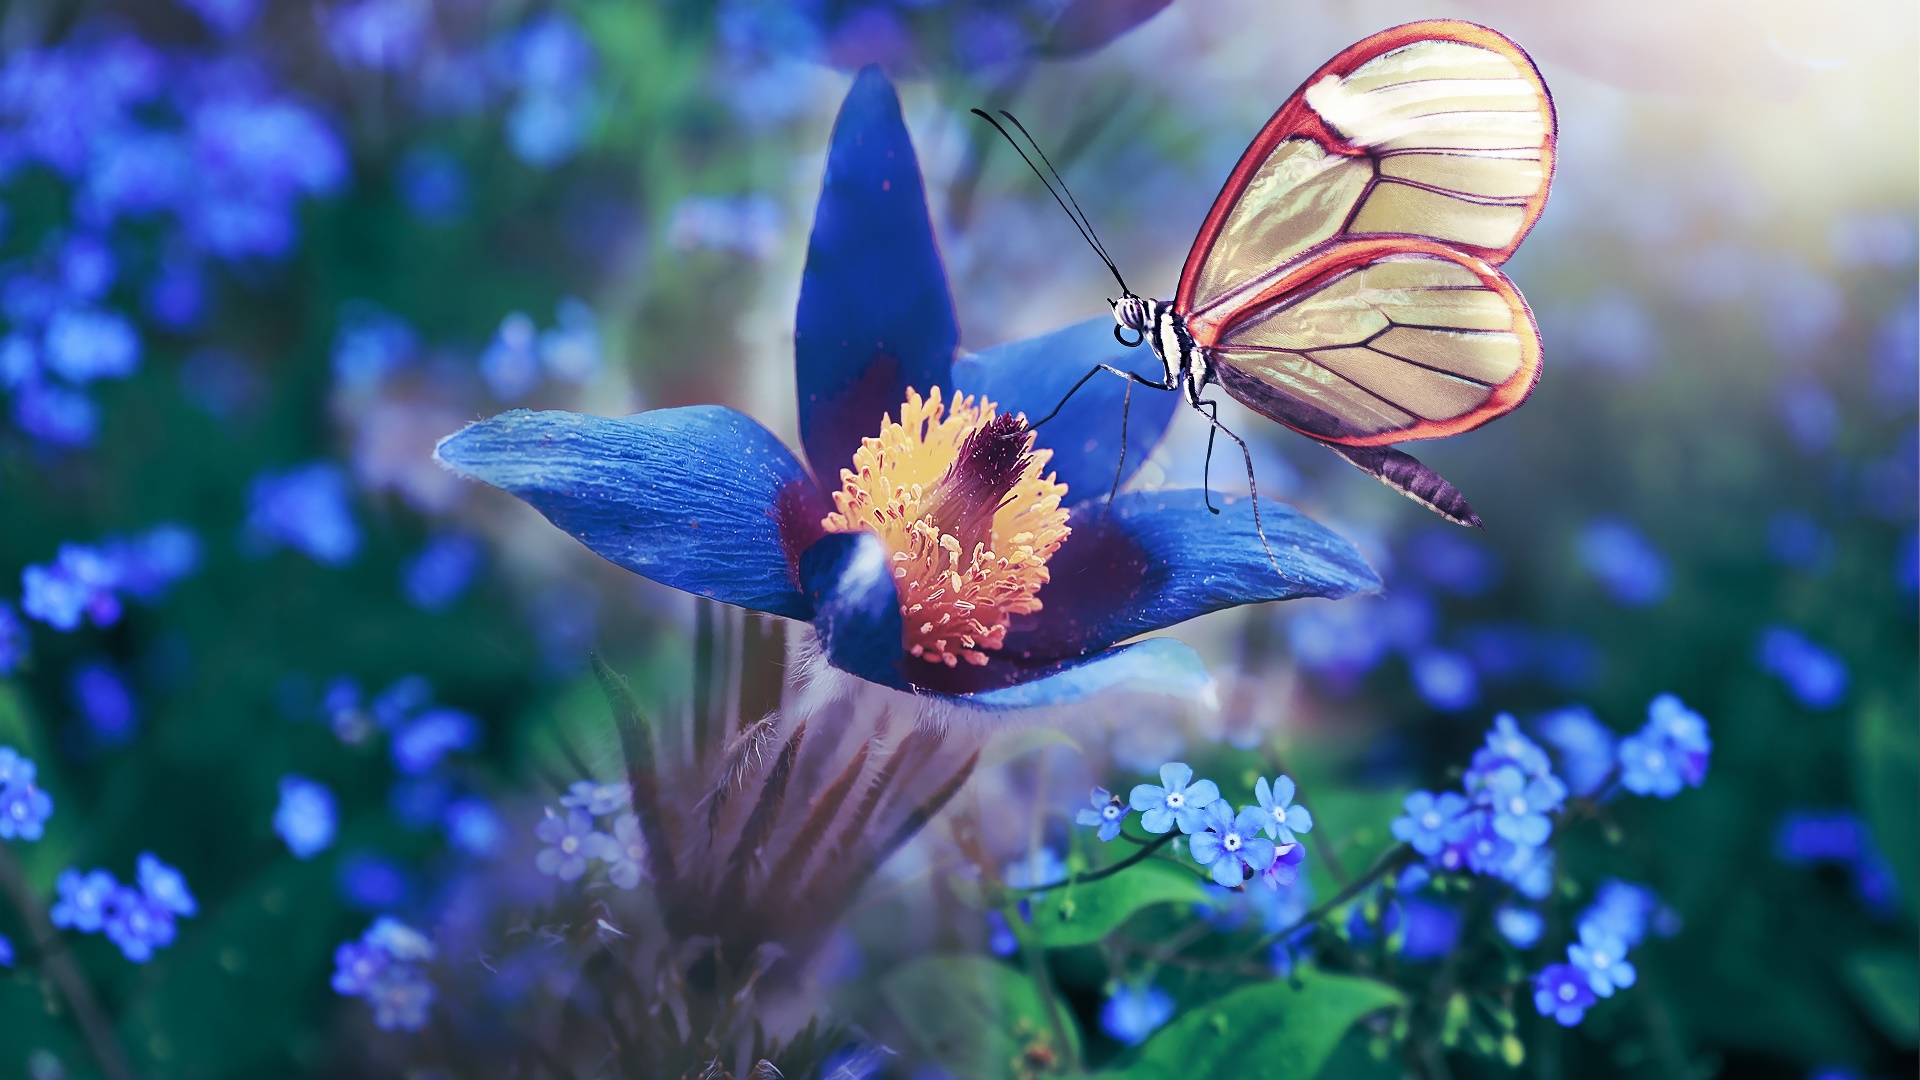 General 1920x1080 butterfly insect flowers plants colorful animals